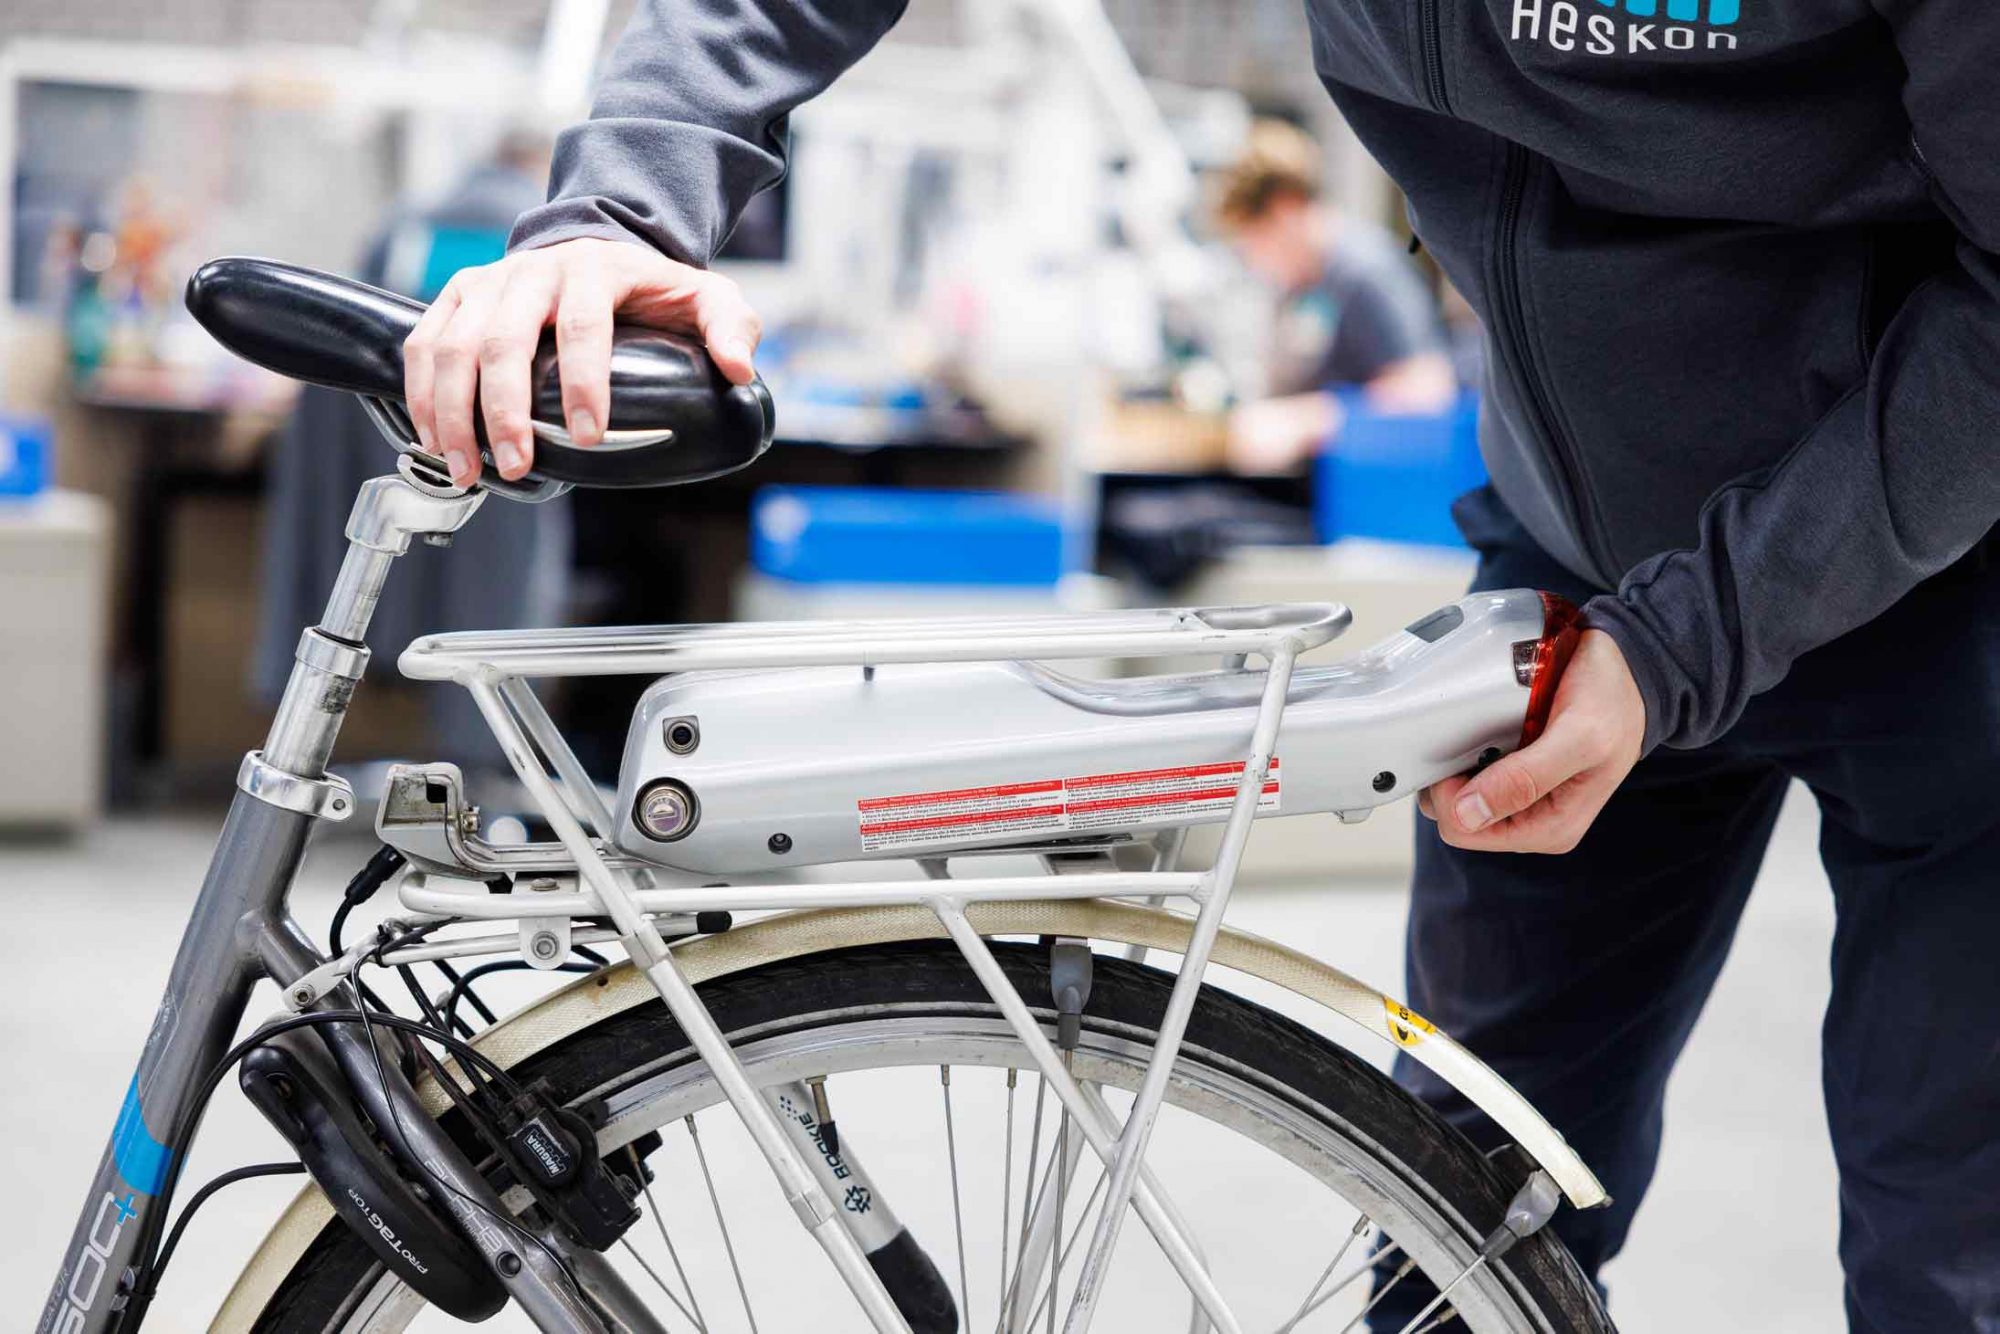 Battery repair specialist heskon also takes care of battery packs for which the manufacturer no longer offers a service. Breathe new life into your old e-bike and use it even more sustainably!